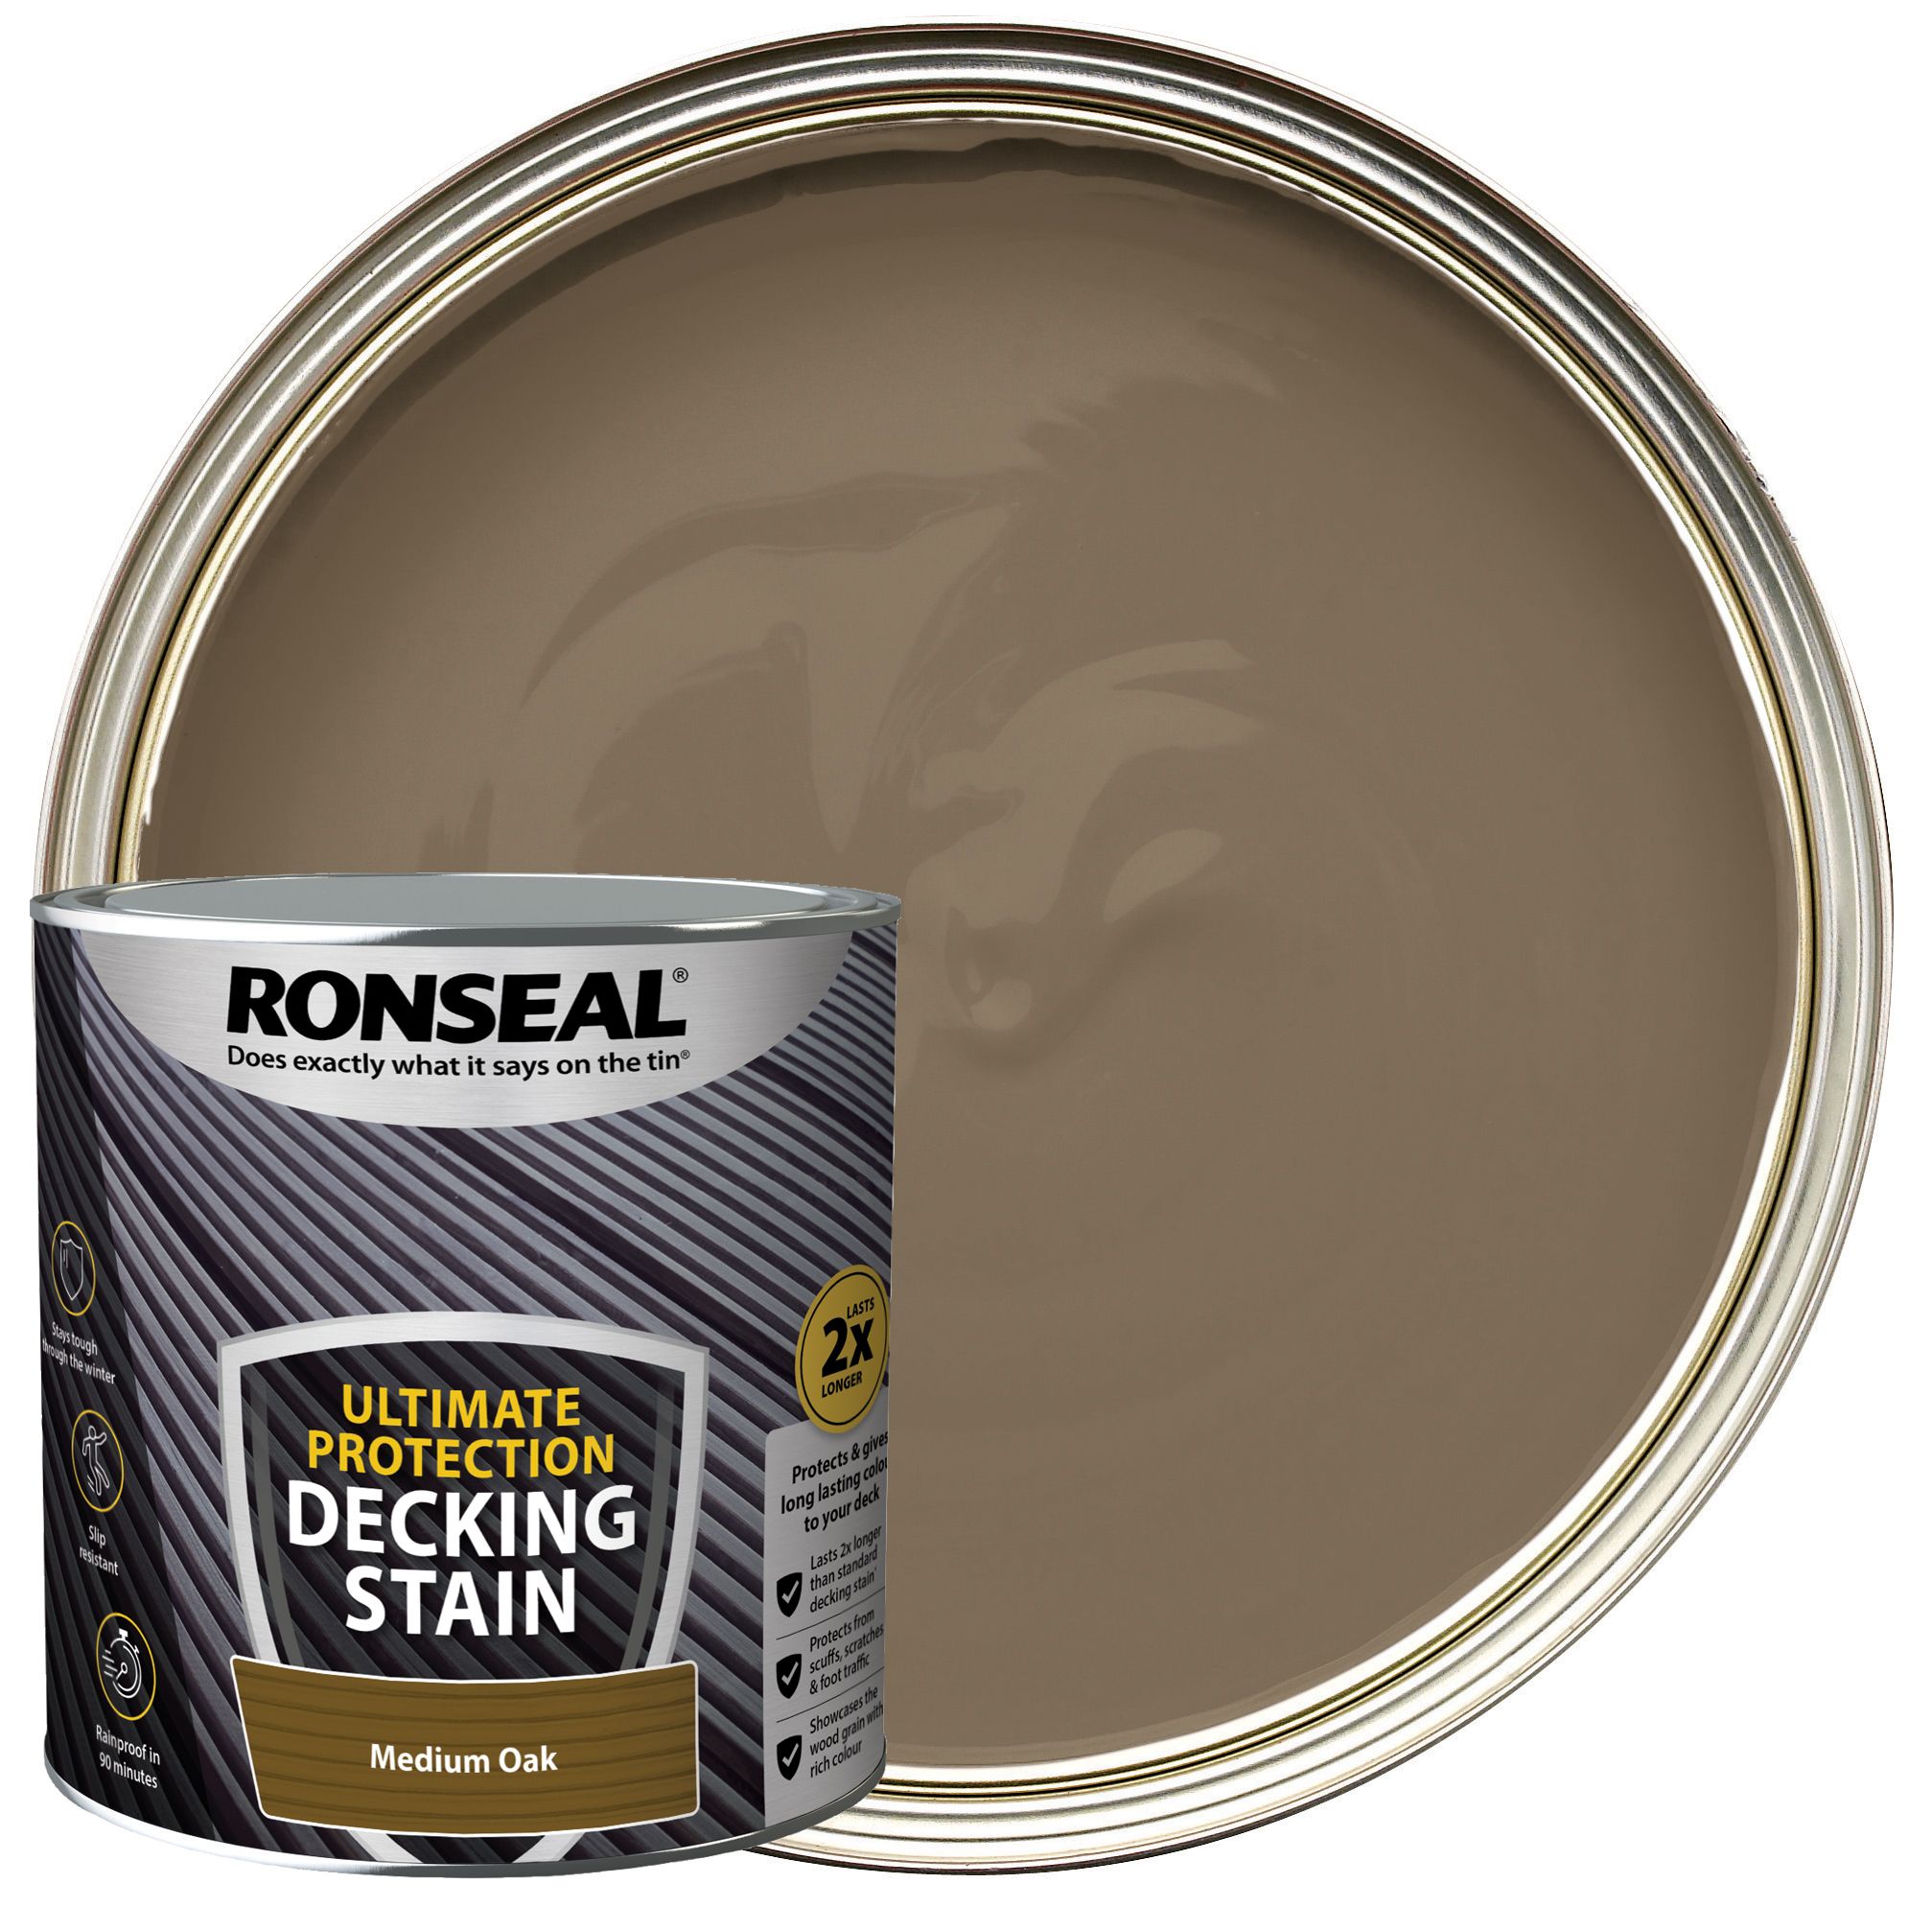 Image of Ronseal Ultimate Protection Medium Oak Decking Stain - 2.5L